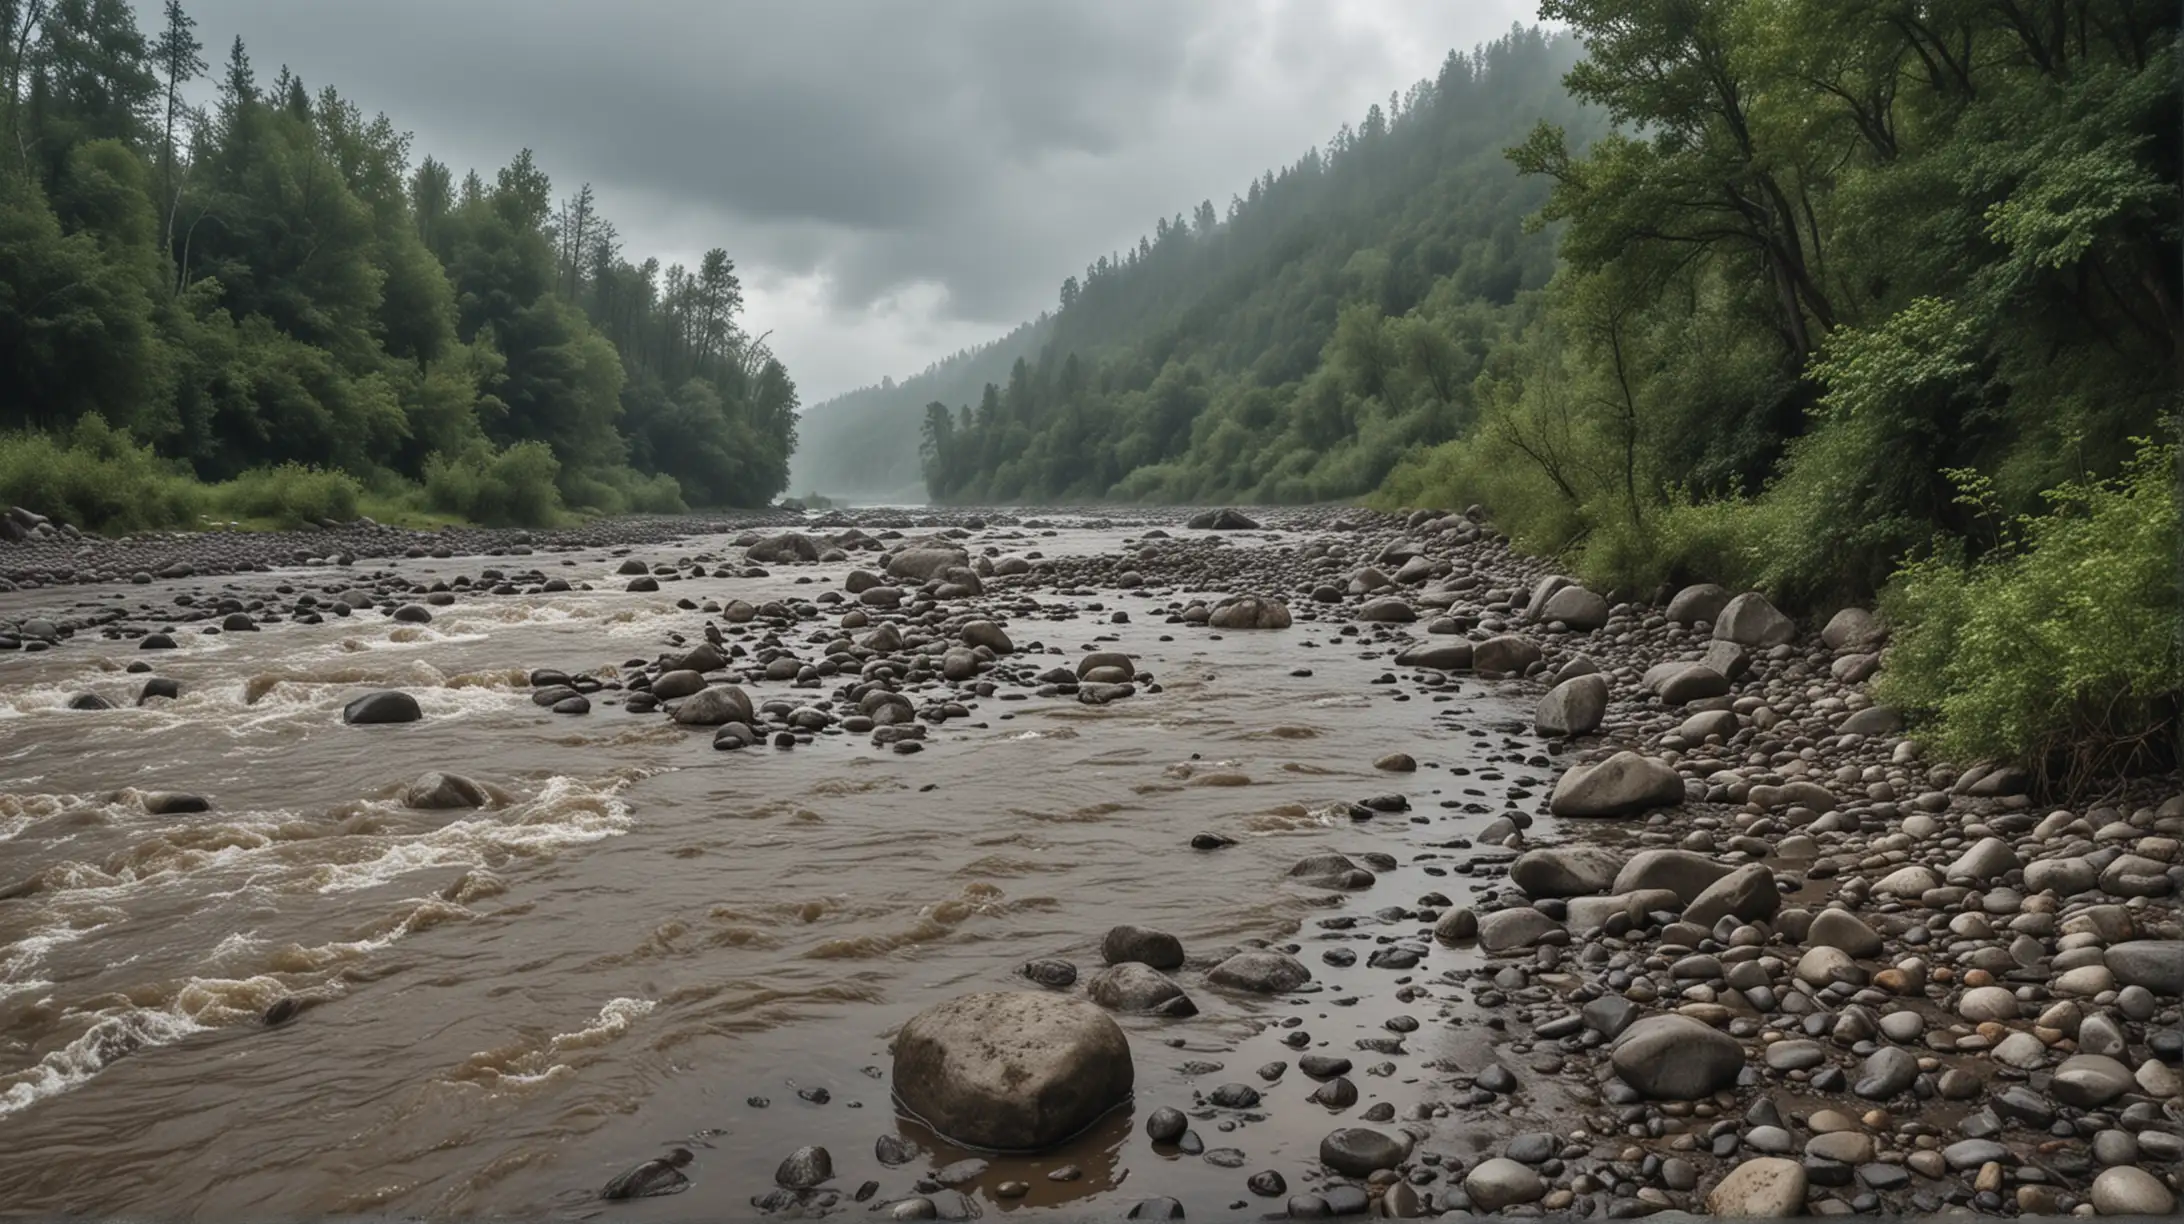 the shore of a wild river in the wilderness, stones, bushes, dwarf trees, mud, hard rain, cloudy, distant view